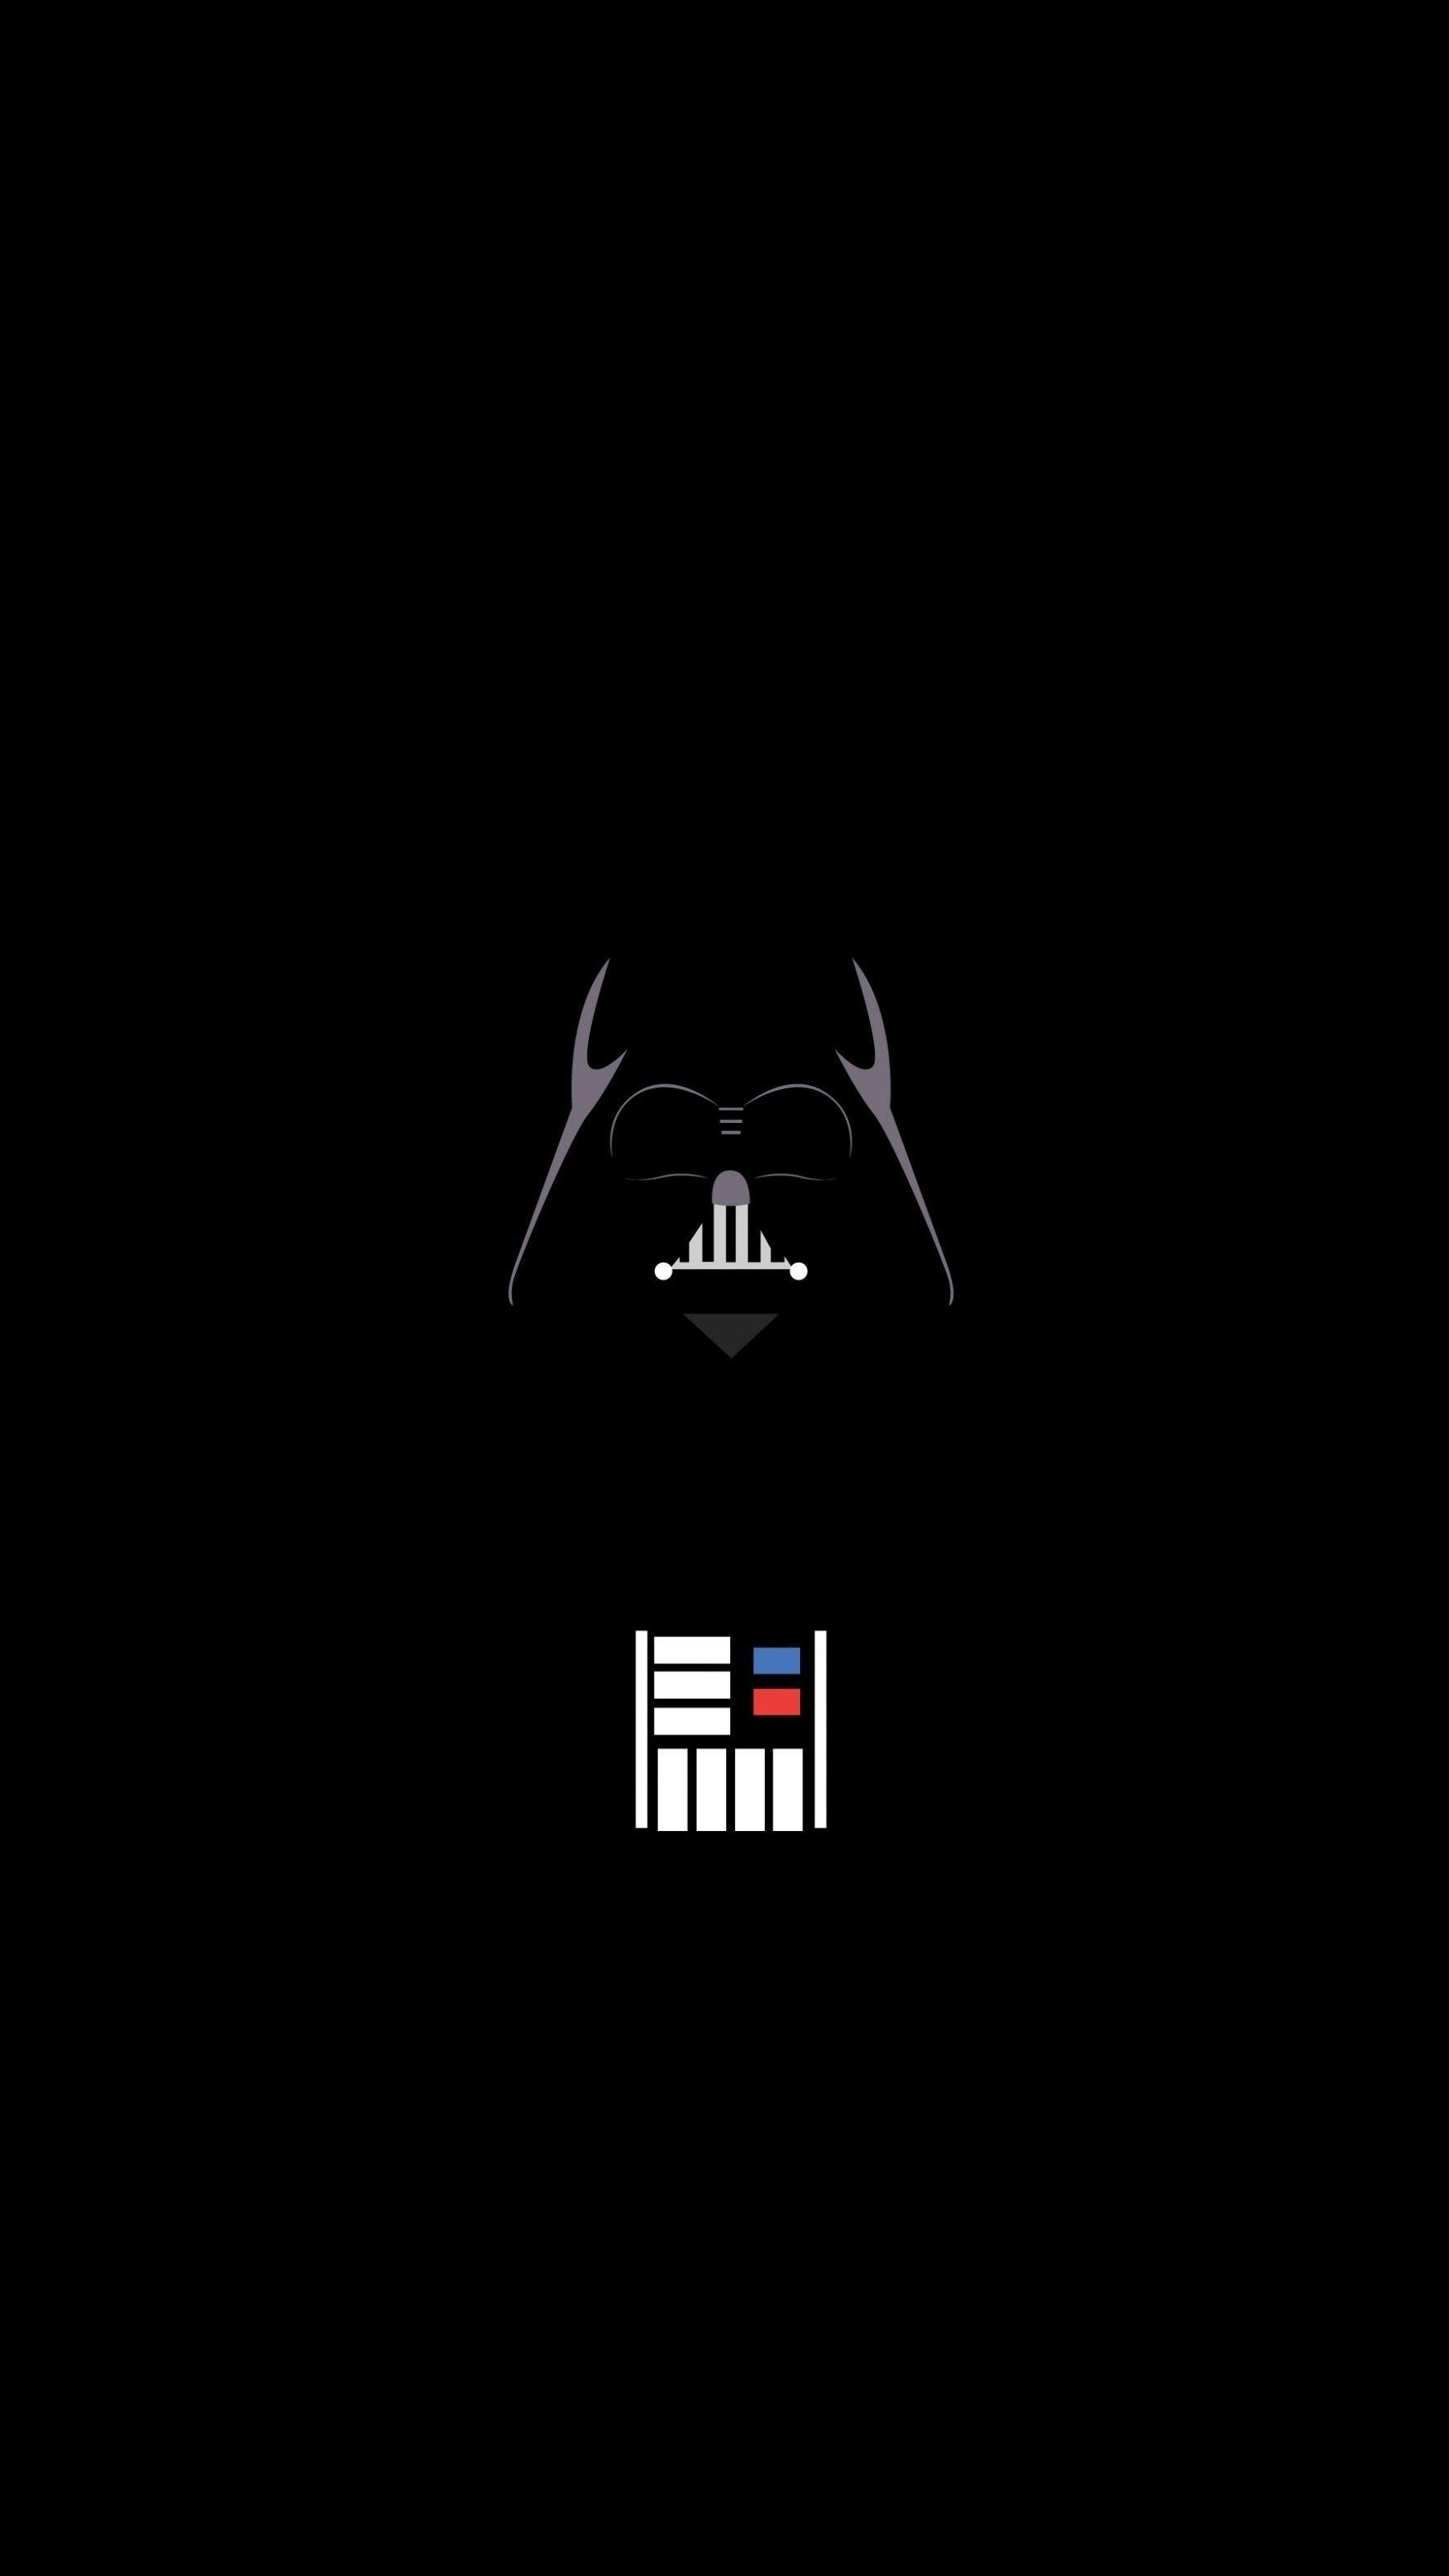 iPhone Marvel Wallpaper HD from Uploaded by user. Star wars